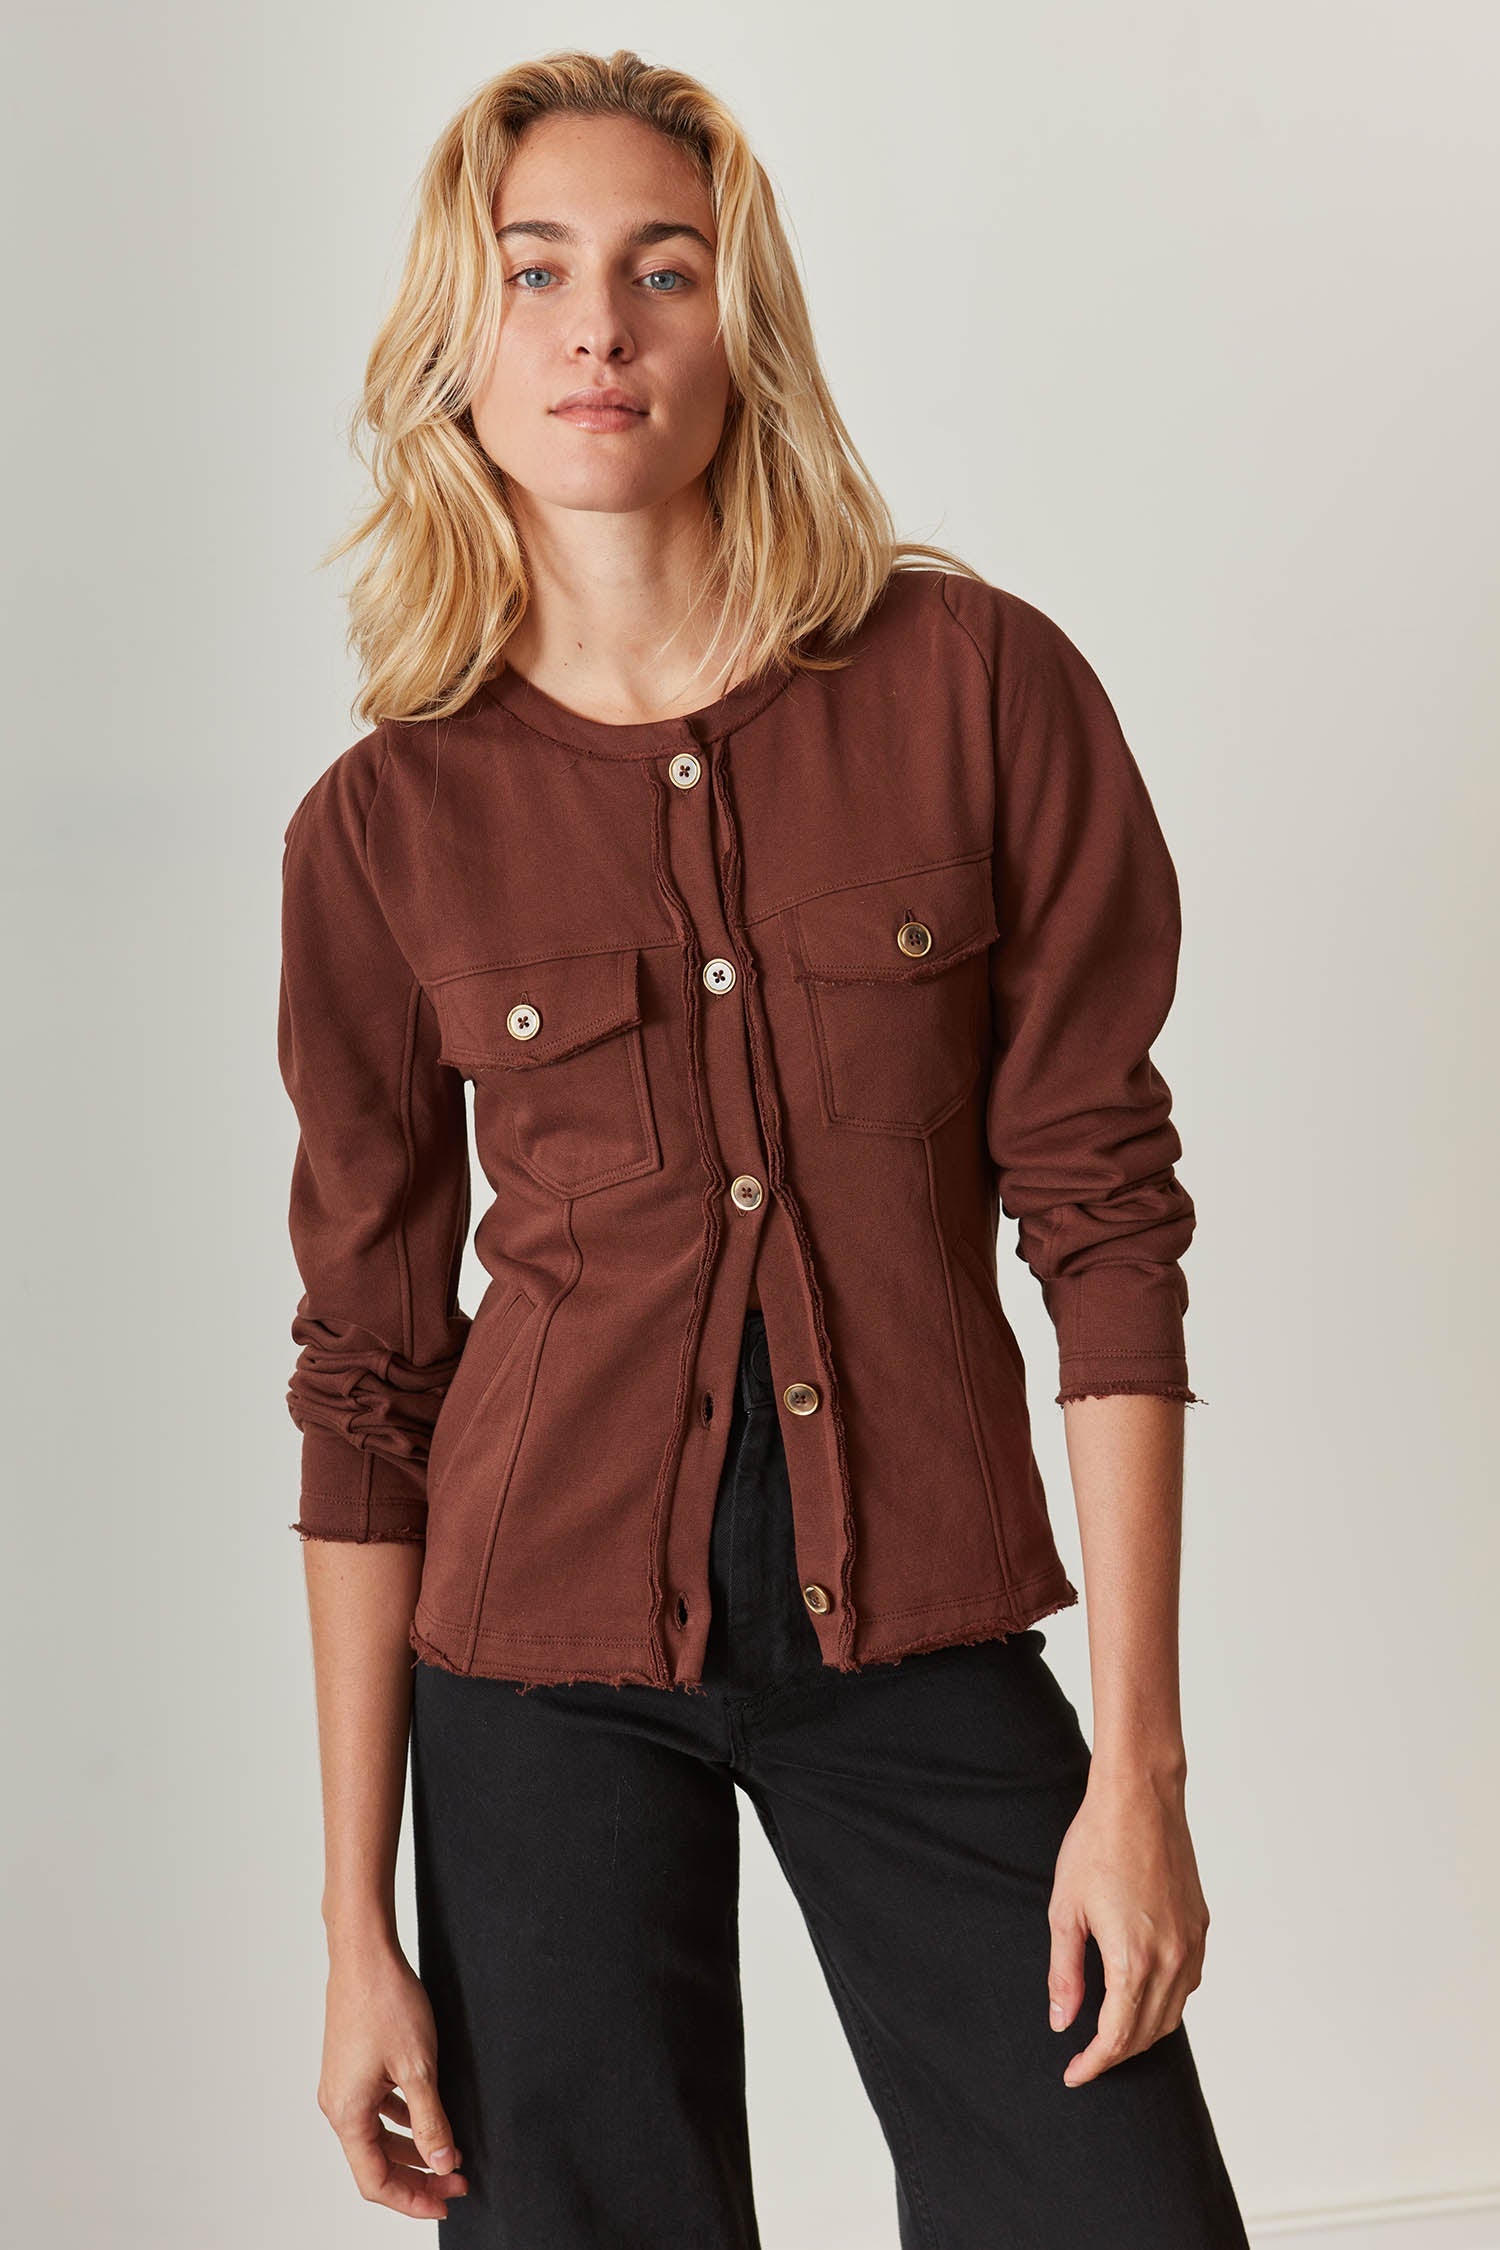 sustainable fashion brand celine inspired cardi jacket in brown